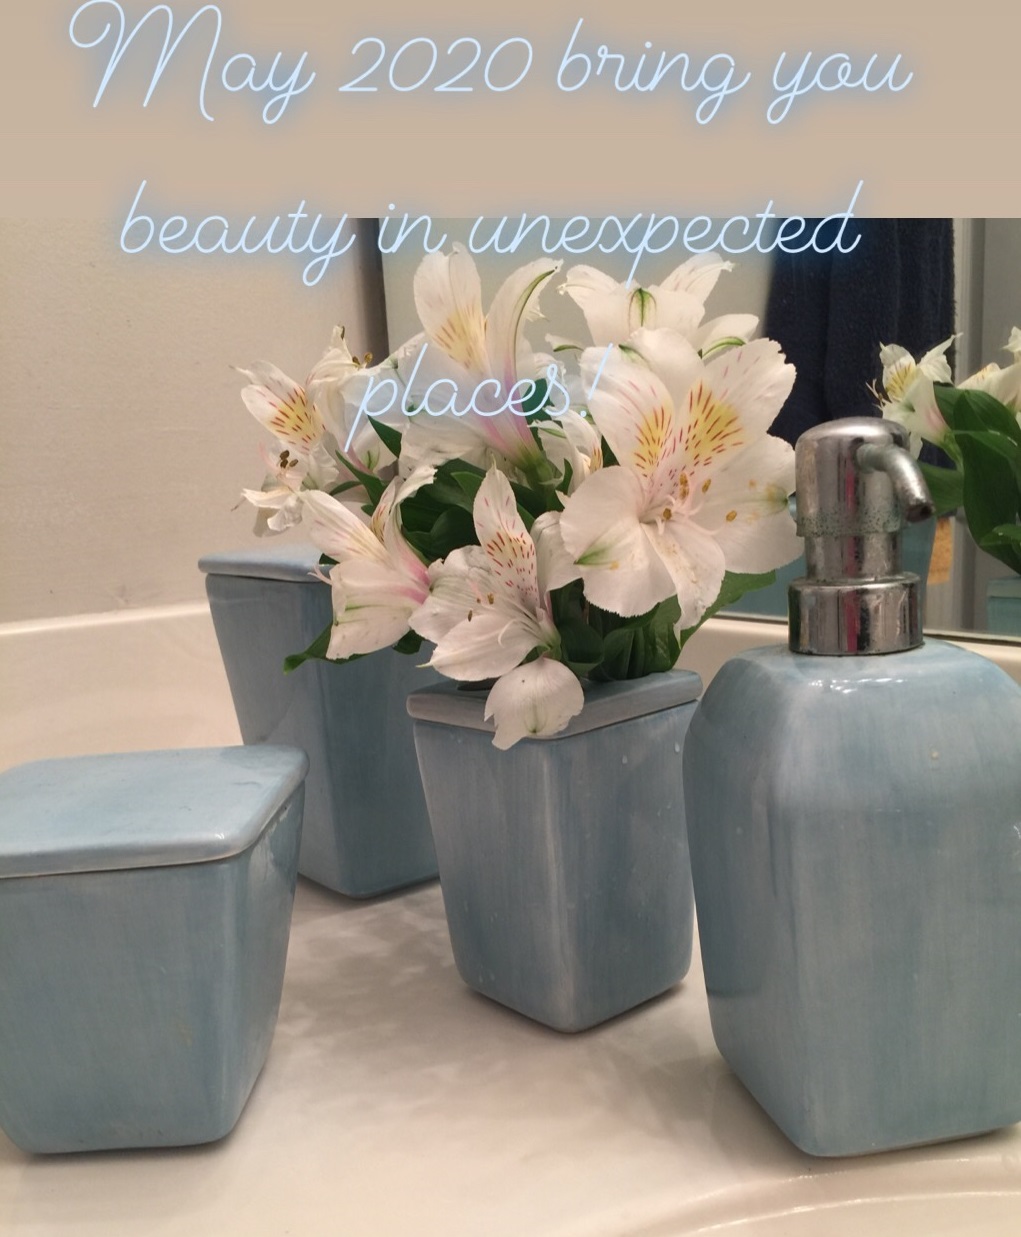 image of flowers in toothbrush holder